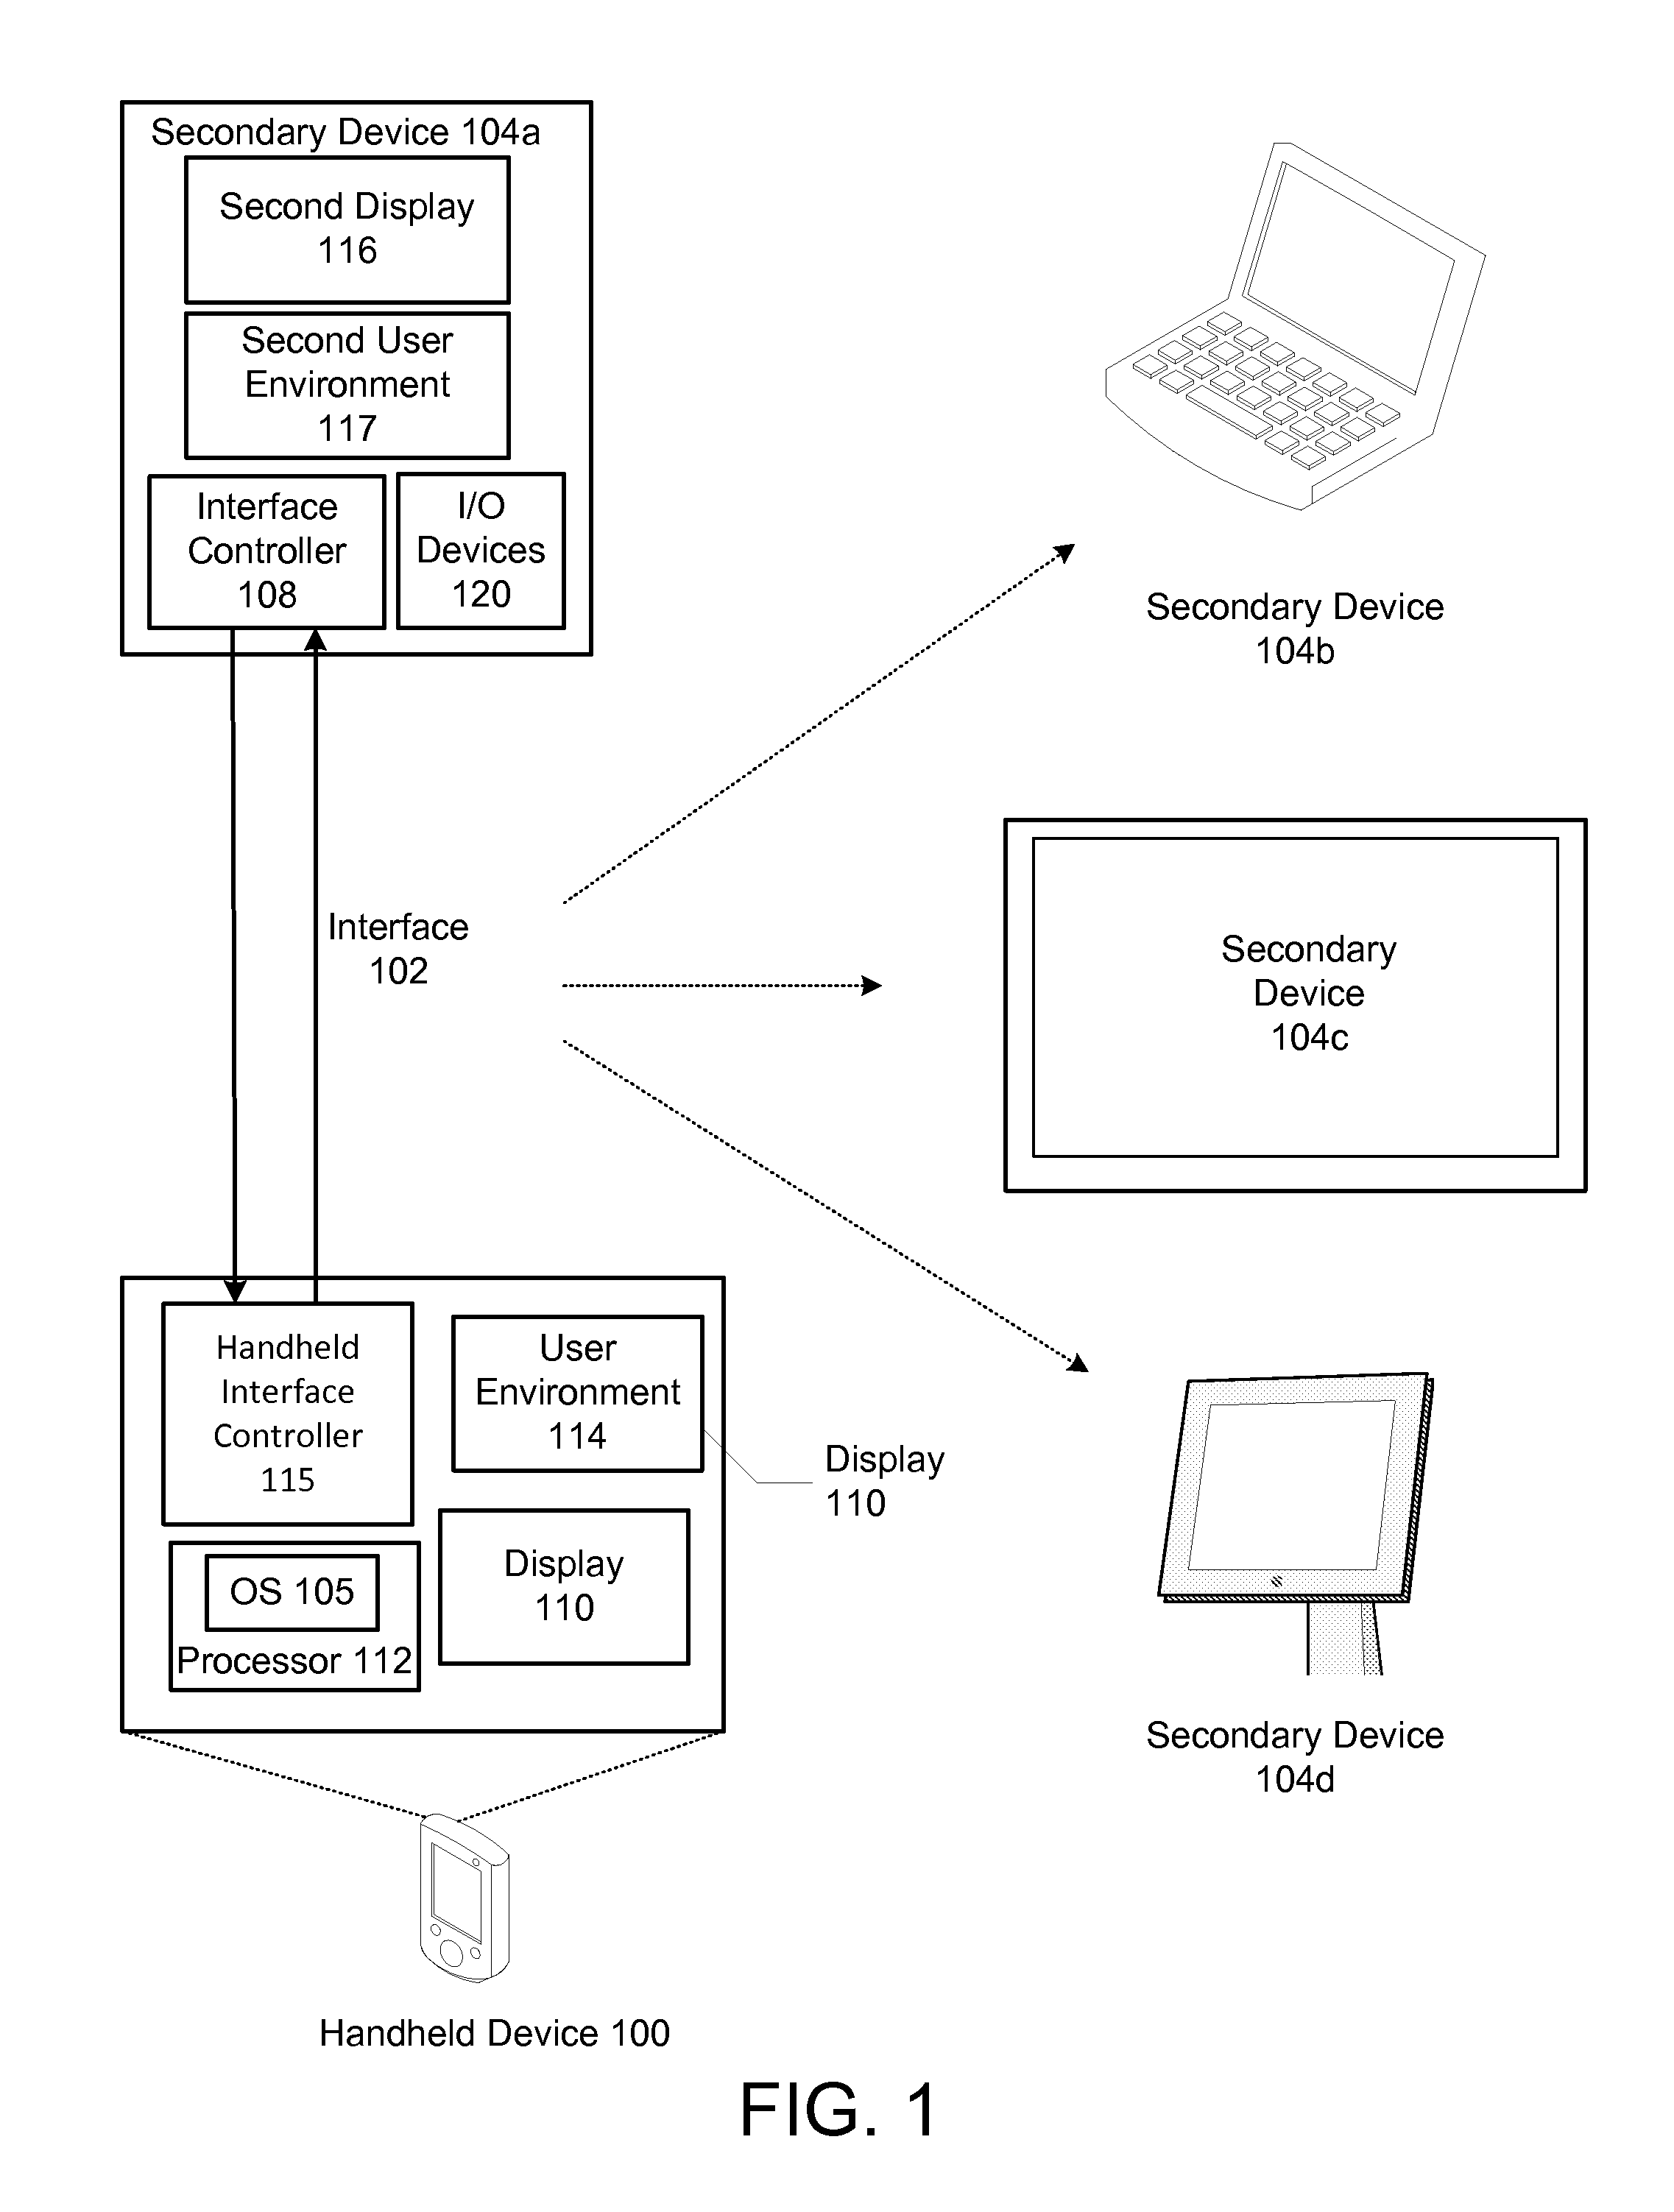 Expandable system architecture comprising a handheld computer device that dynamically generates different user environments with secondary devices with displays of various form factors